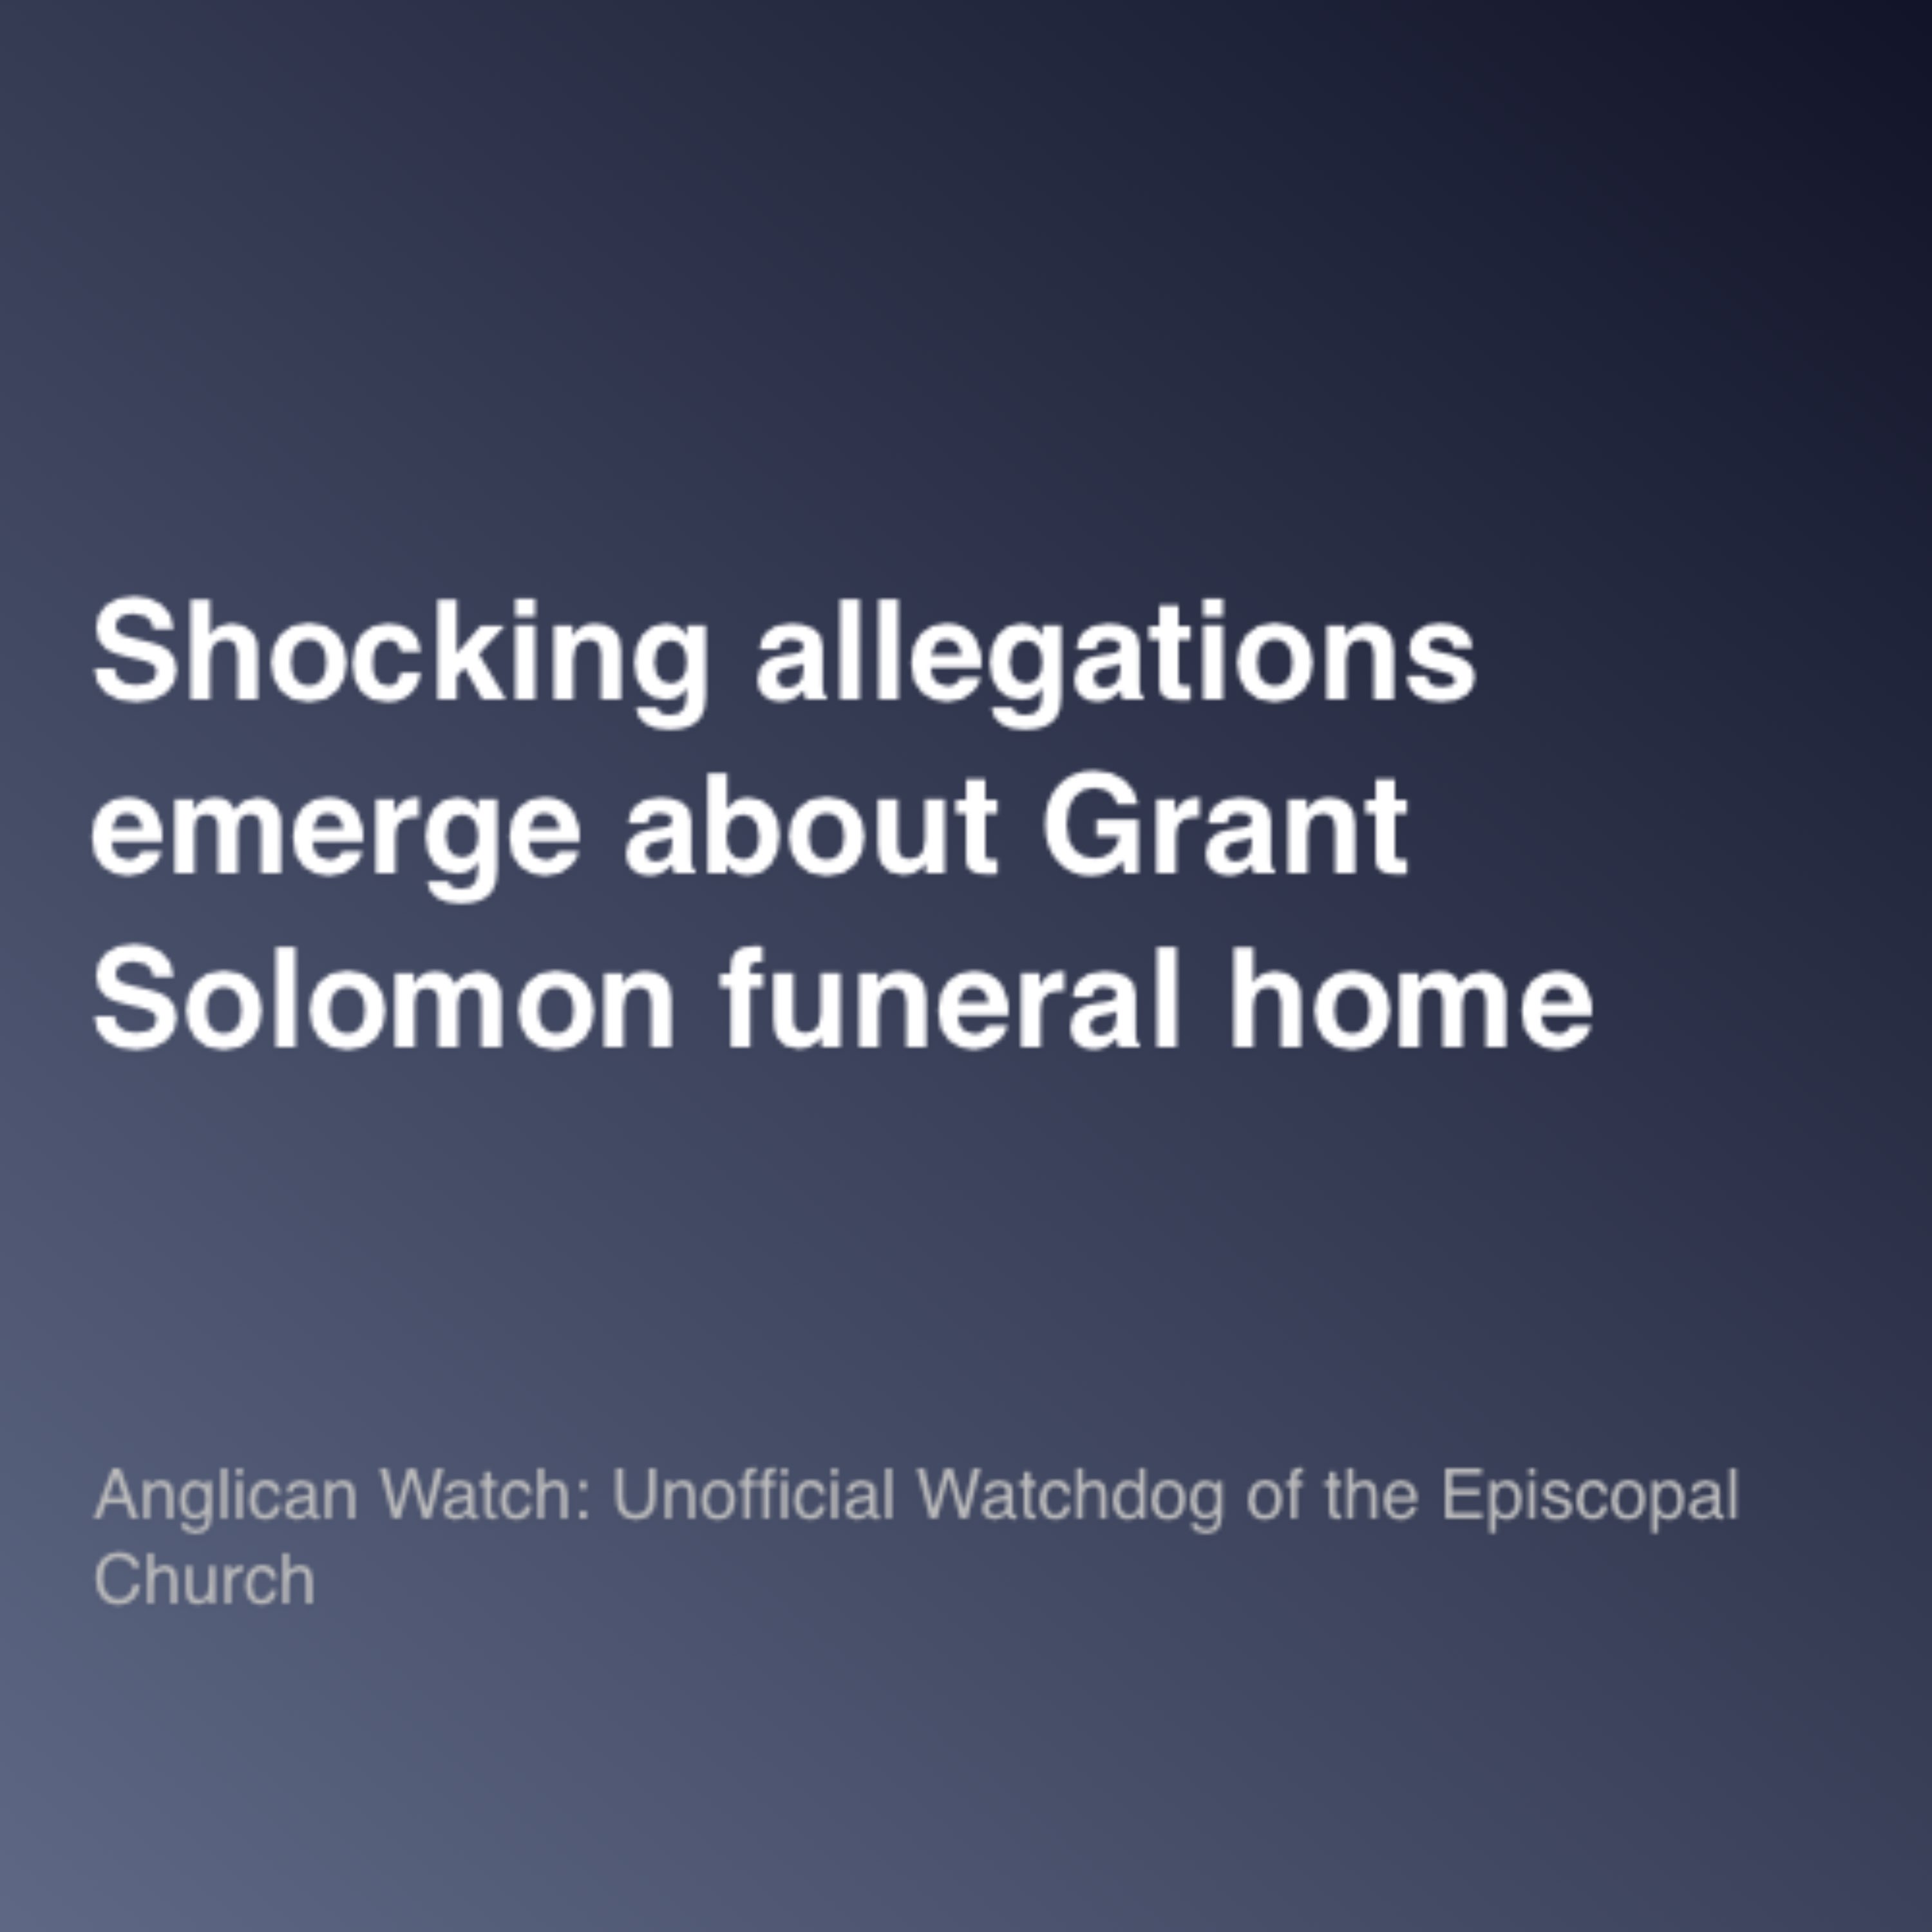 Shocking allegations emerge about Grant Solomon funeral home